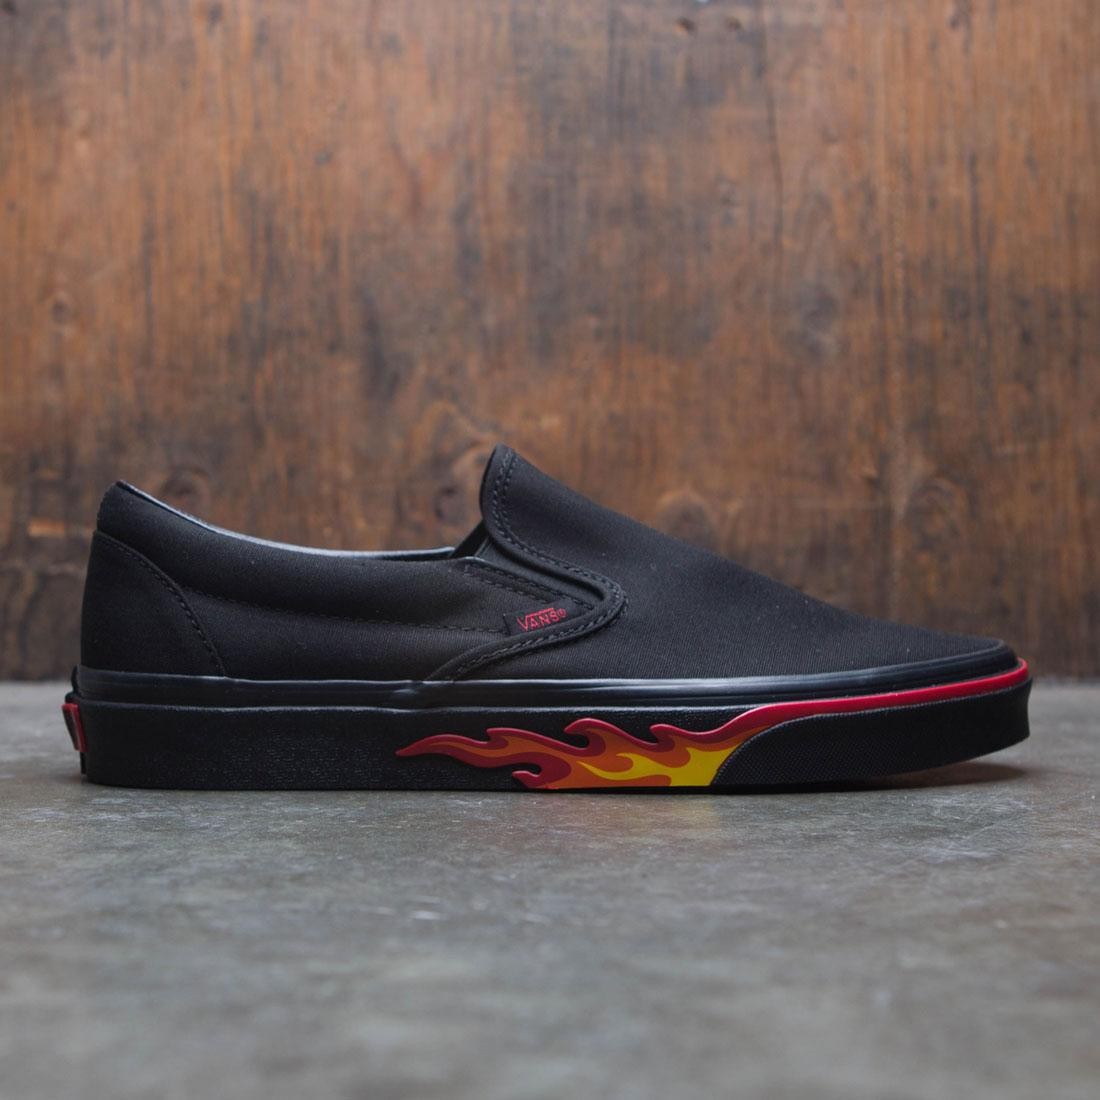 slip on vans with fire